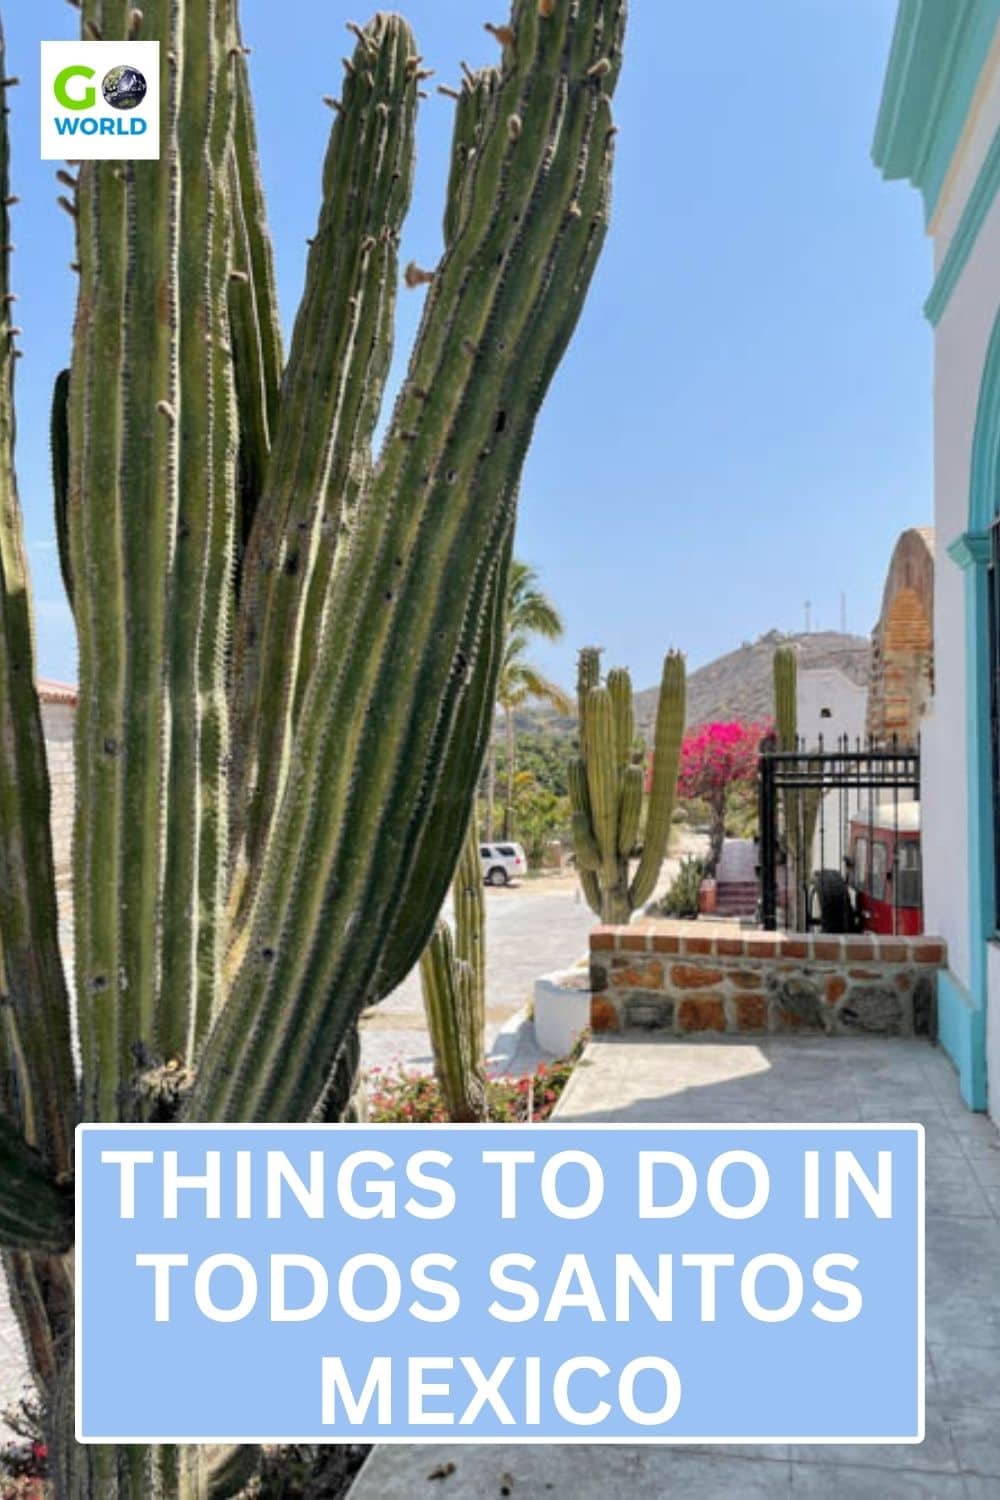 Discover the top things to do in the peaceful town of Todos Santos, Mexico including swimming with whale sharks and releasing sea turtles. #mexico #bajacaliforniasur #todossantos